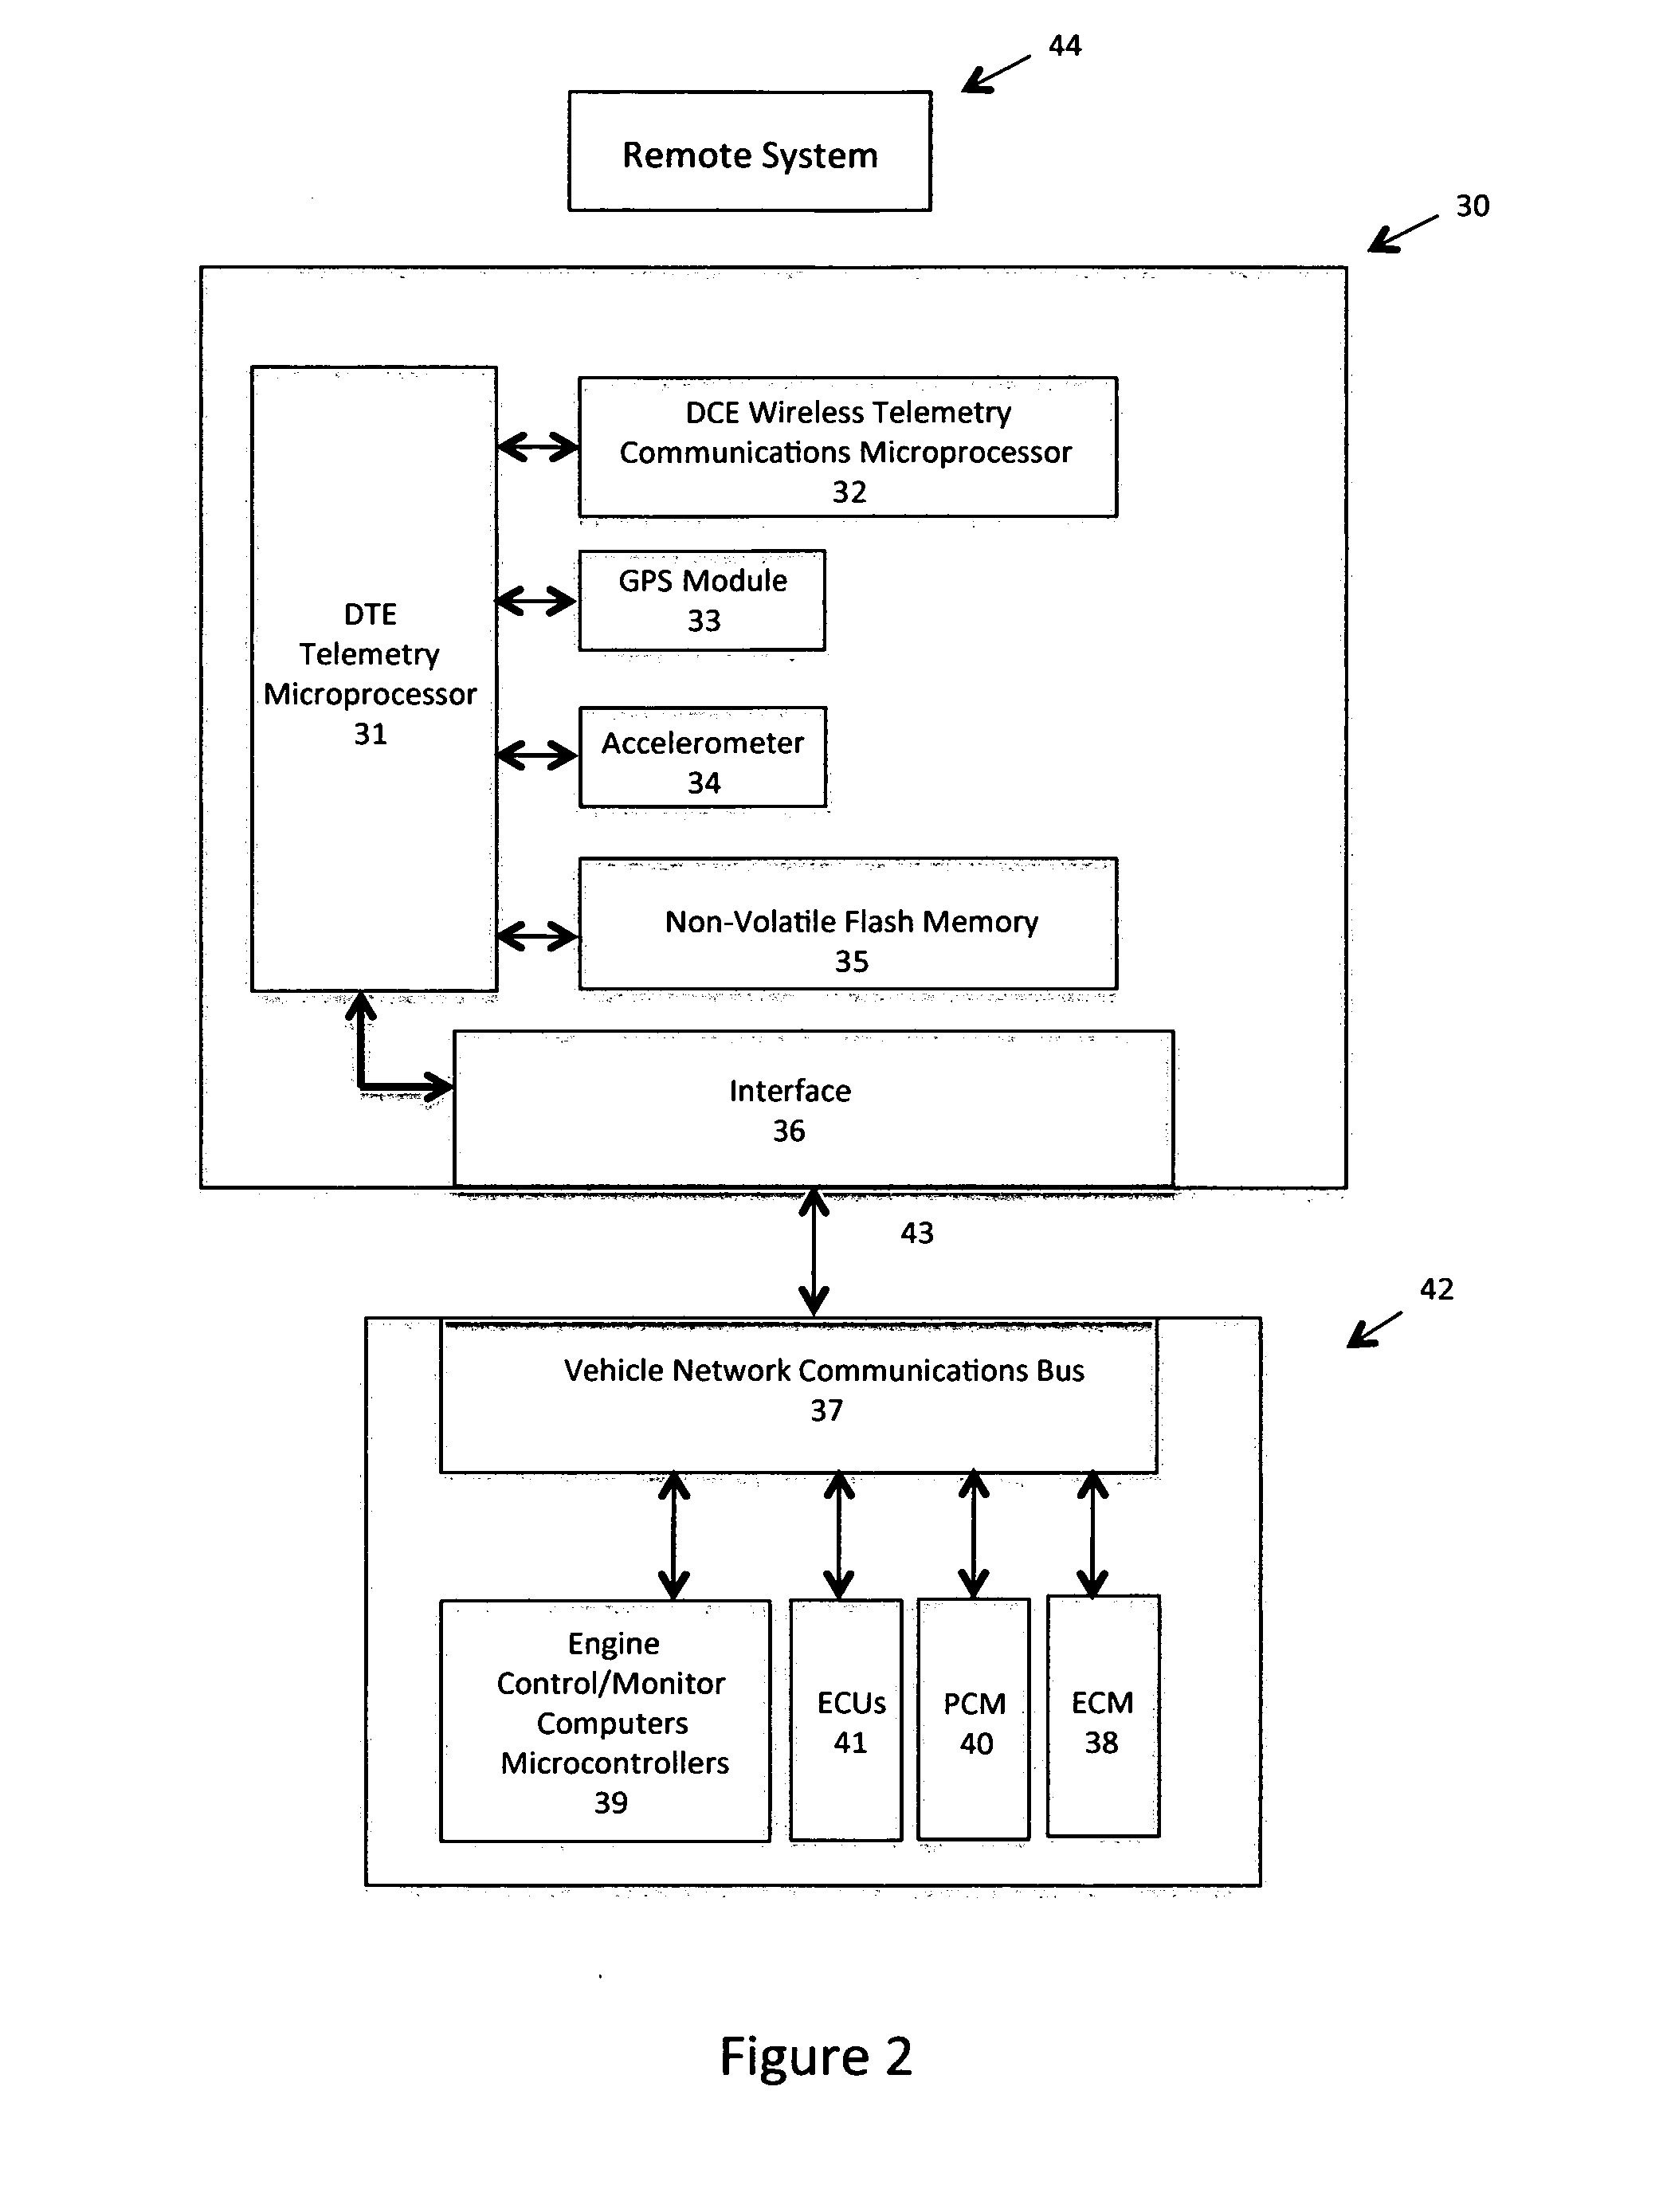 Mobile device protocol health monitoring system